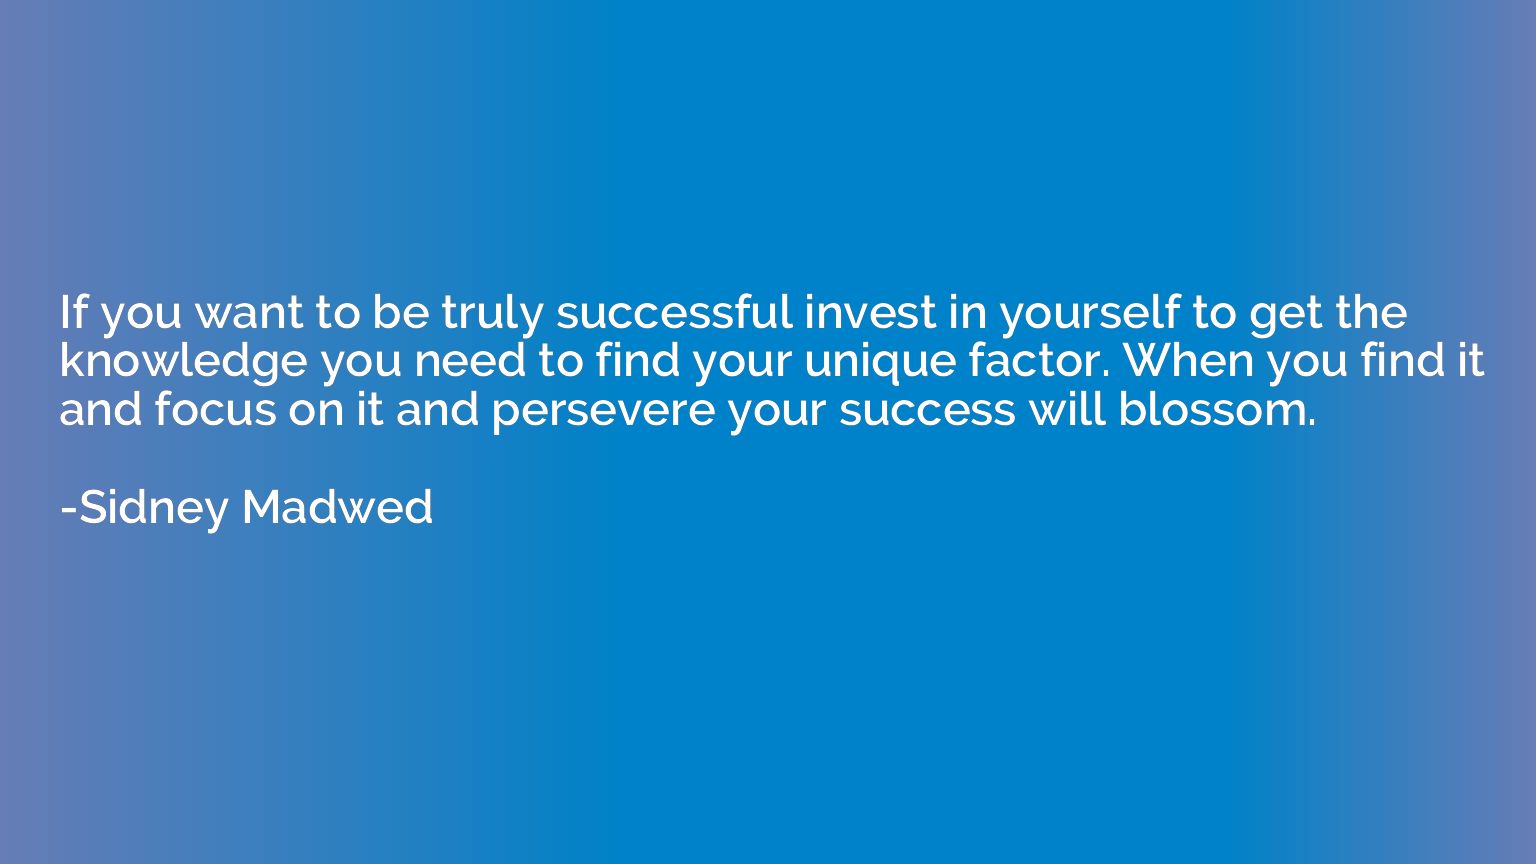 If you want to be truly successful invest in yourself to get